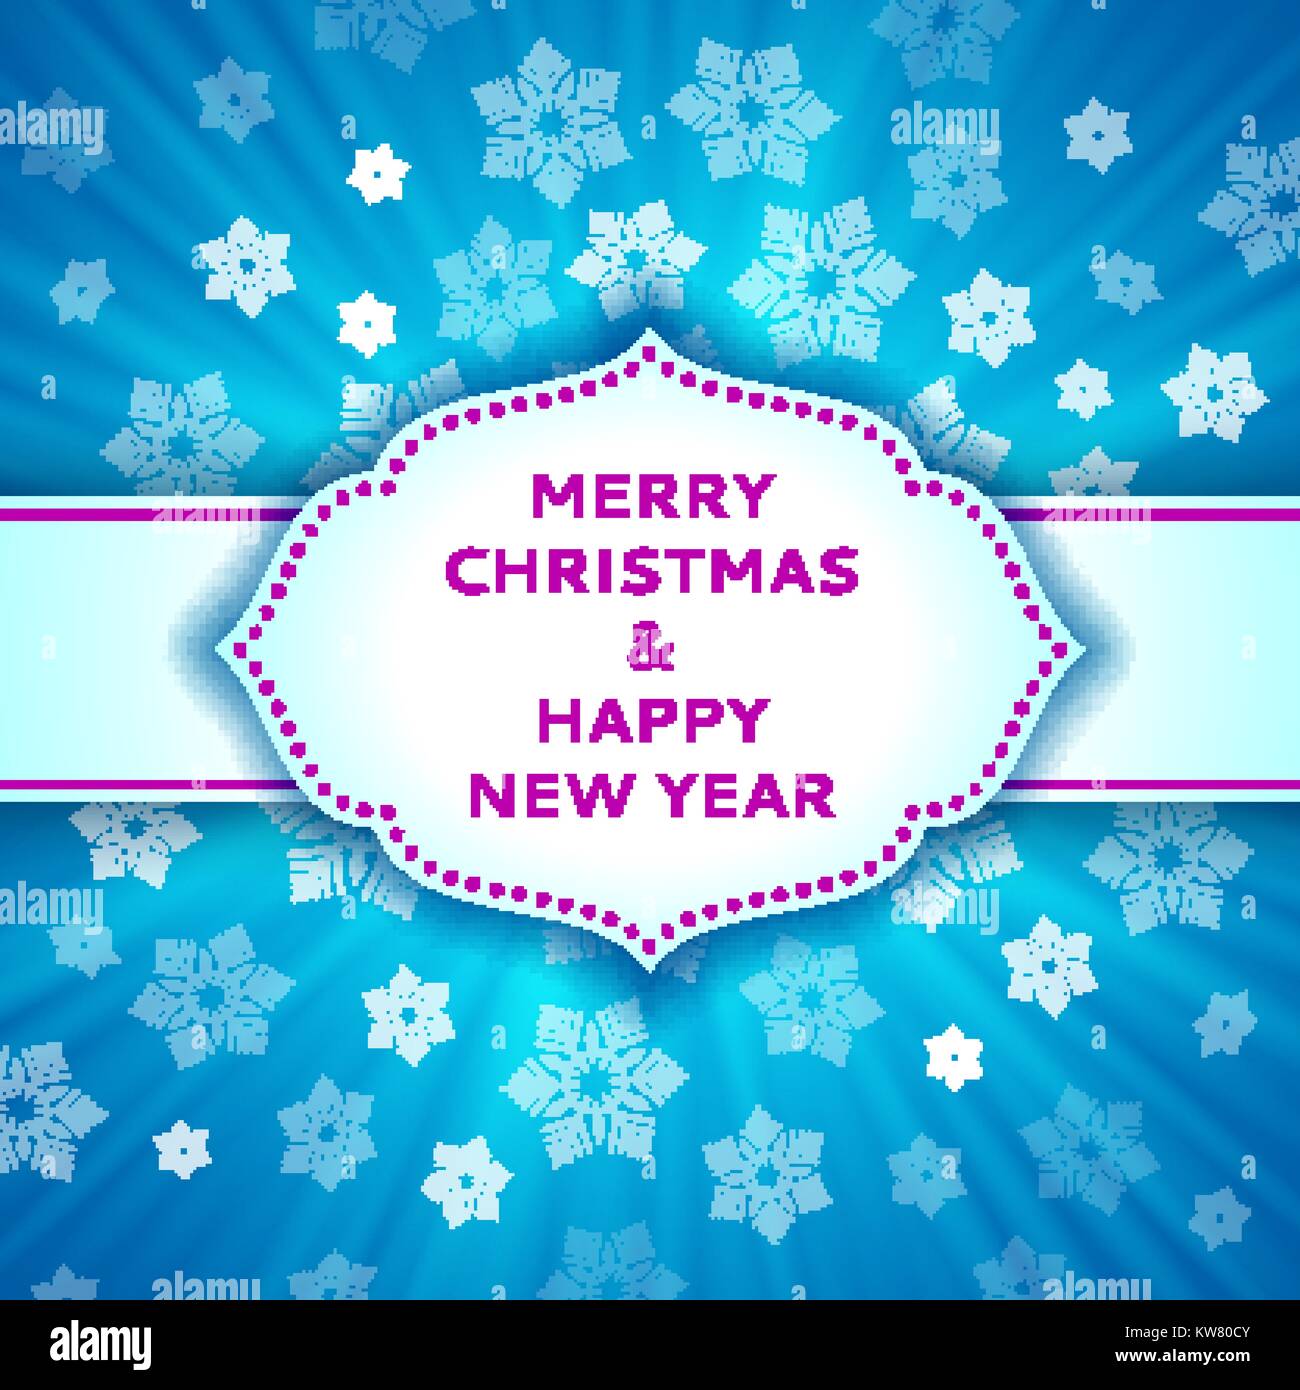 Blue christmas background with snowflakes Stock Vector